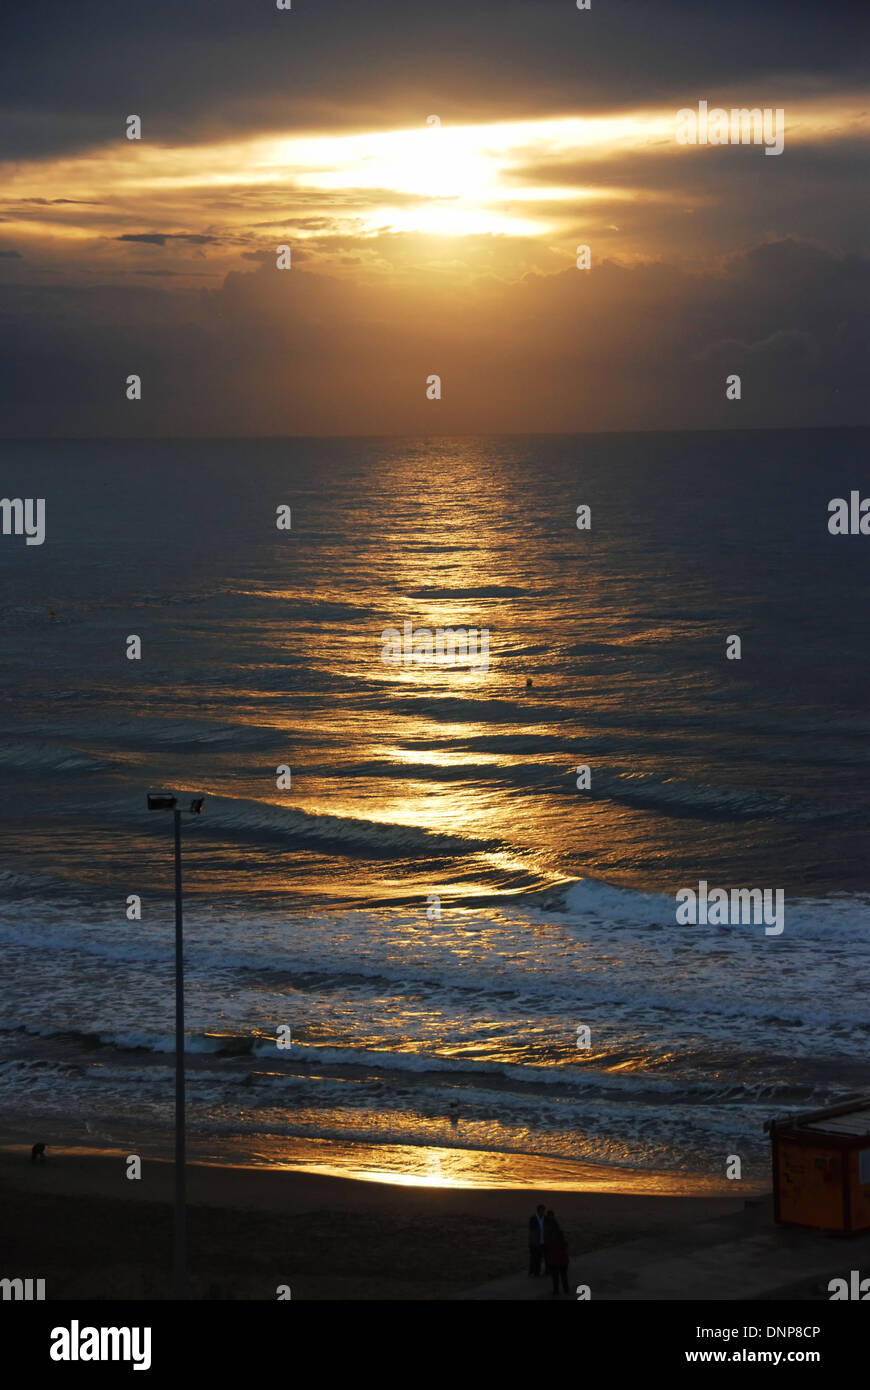 Sun peeping through clouds, while setting over the Mediterranean Coast of Sitges, Spain Stock Photo